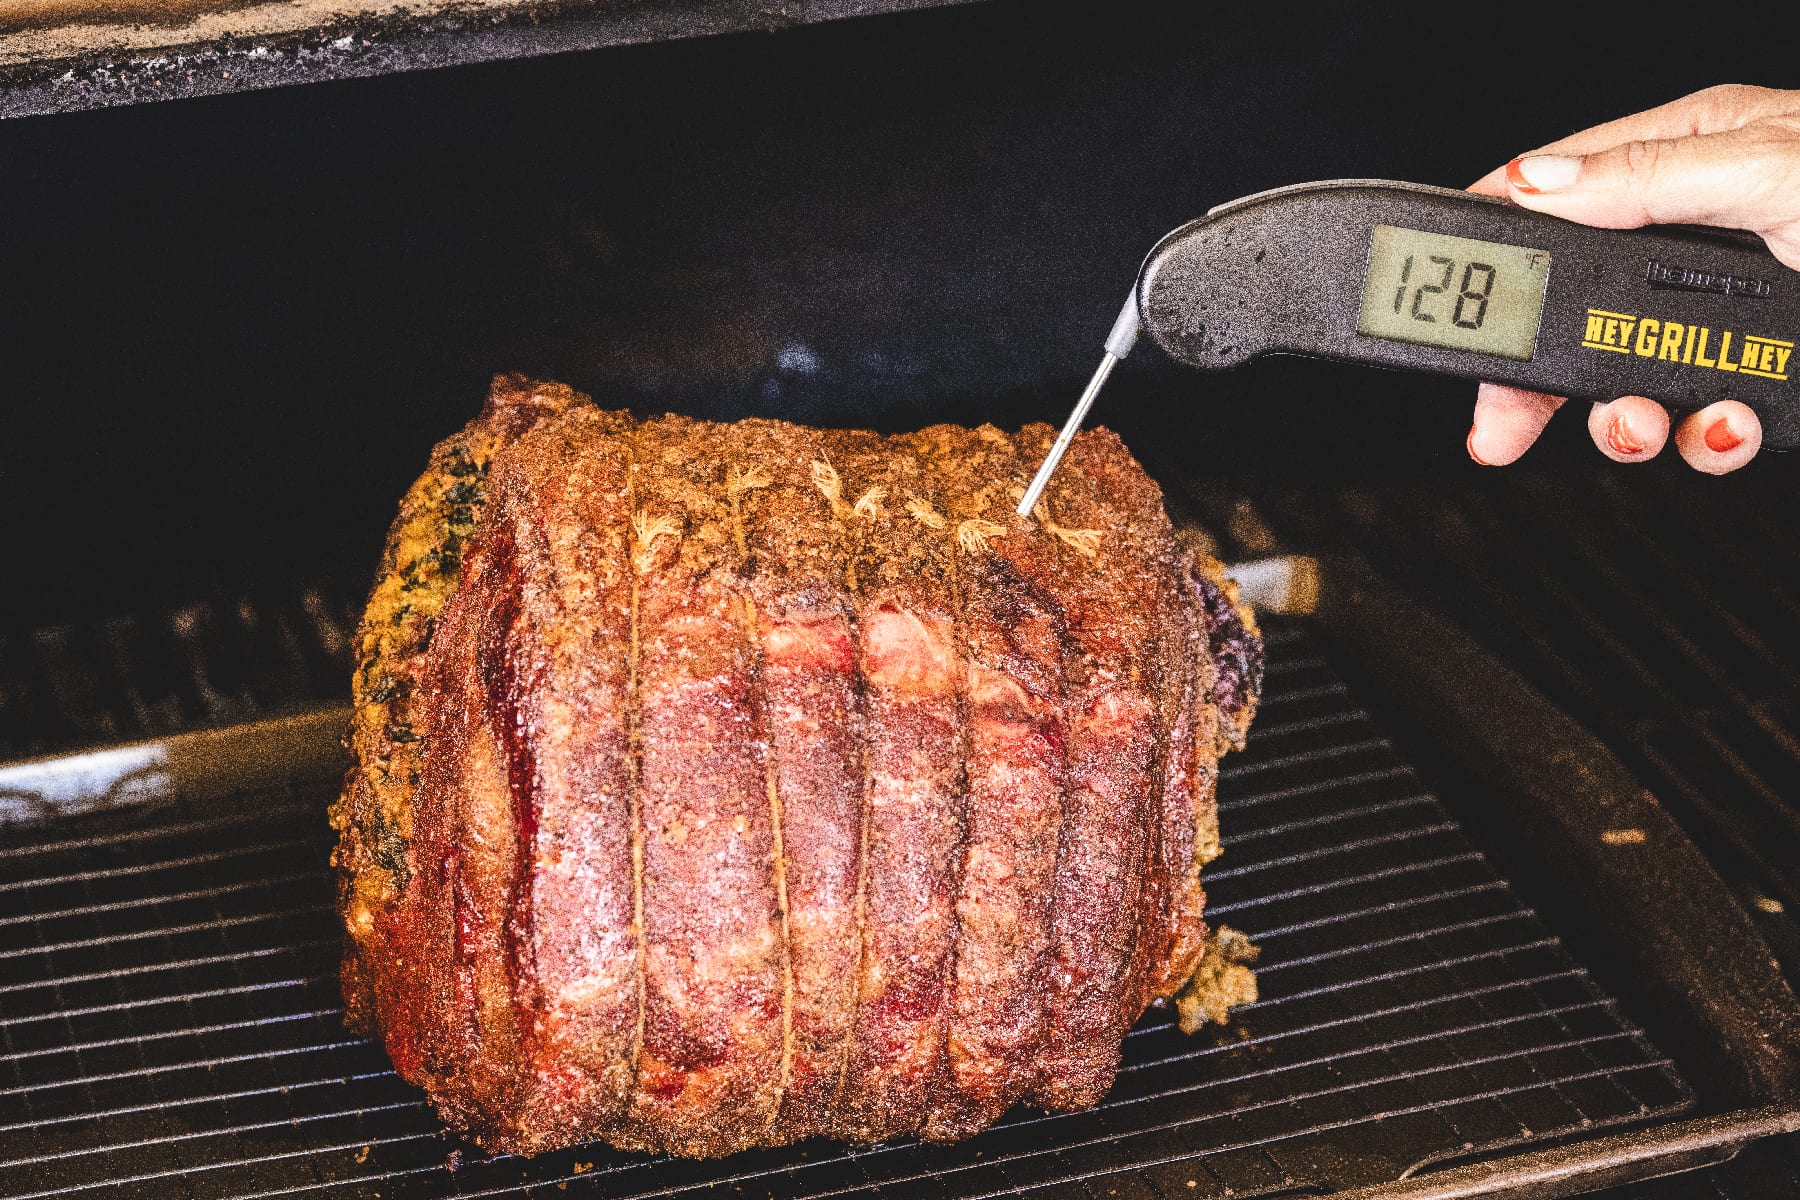 RIb roast on smoker with thermometer reading 128 degrees F.